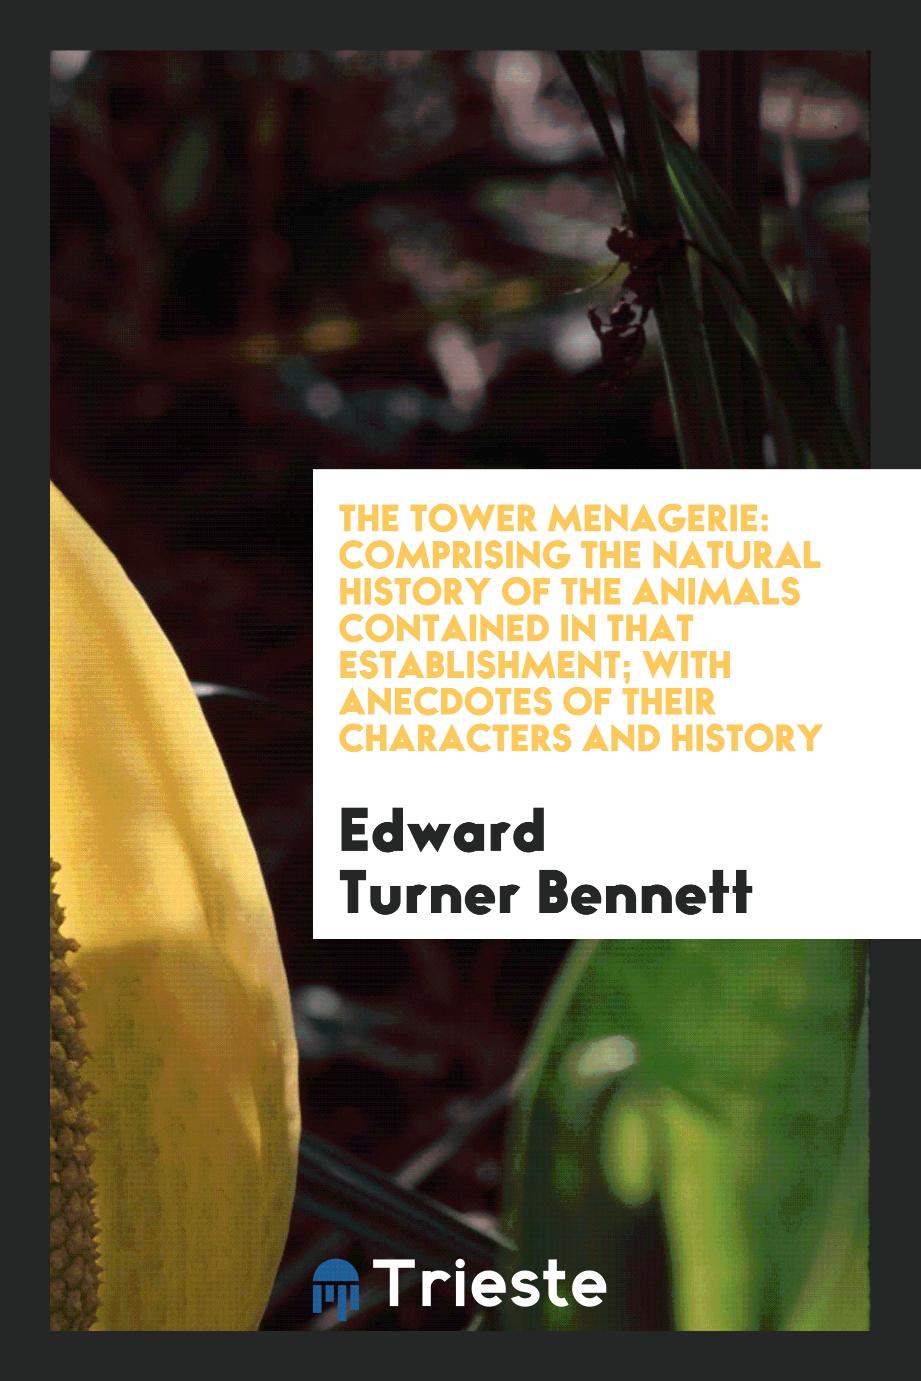 The Tower menagerie: comprising the natural history of the animals contained in that establishment; with anecdotes of their characters and history